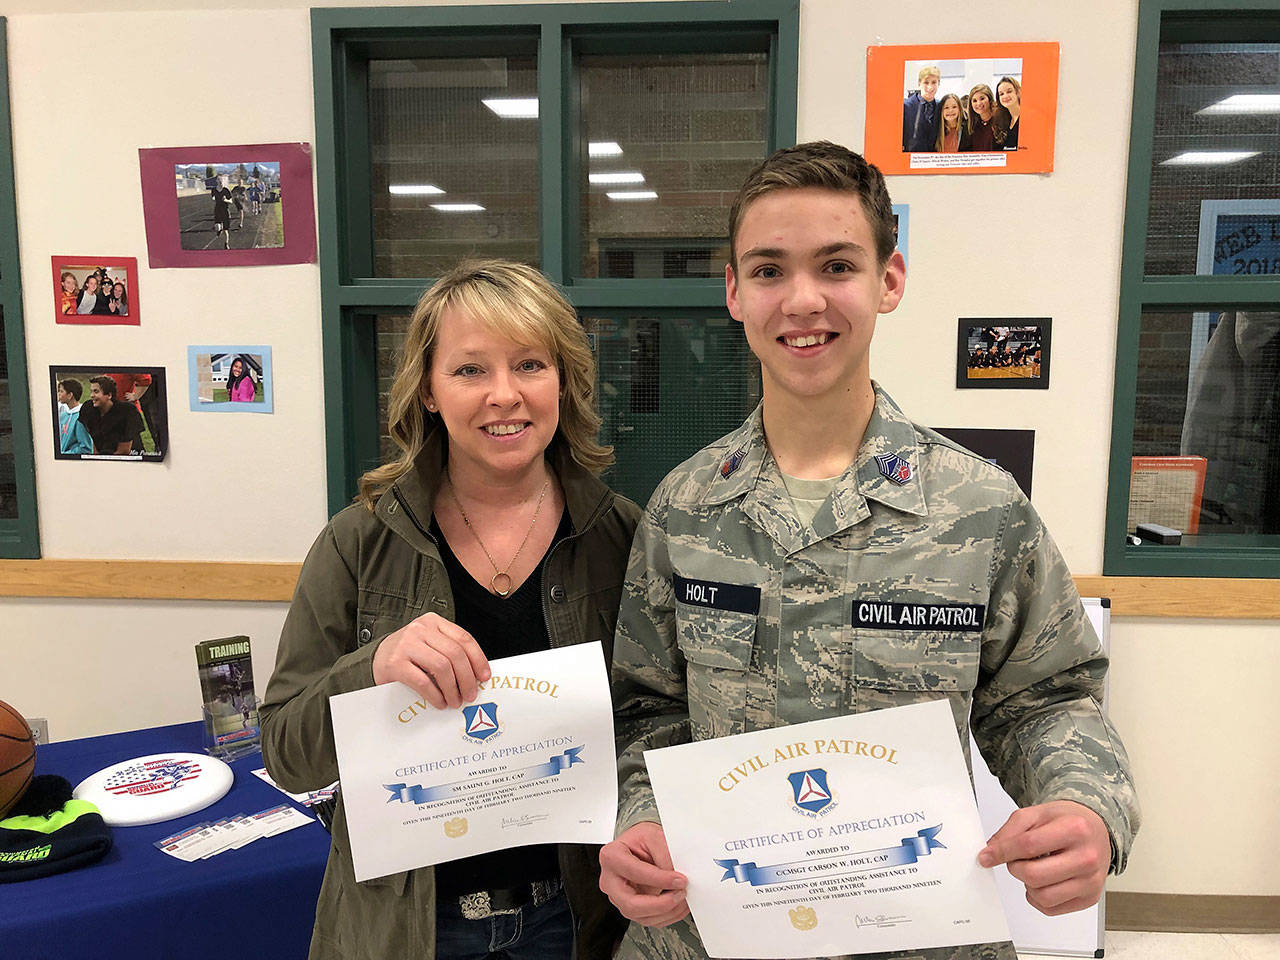 Two Civil Air Patrol members, senior member Sauni Holt and cadet CMSgt. Carson Holt, show certificates they received with challenge coins for their recent donation to the organization’s unit in Sequim. Photo courtesy of Civil Air Patrol                                Two Civil Air Patrol members, senior member Sauni Holt and cadet CMSgt. Carson Holt, show certificates they received with challenge coins for their recent donation to the organization’s unit in Sequim. Photo courtesy of Civil Air Patrol